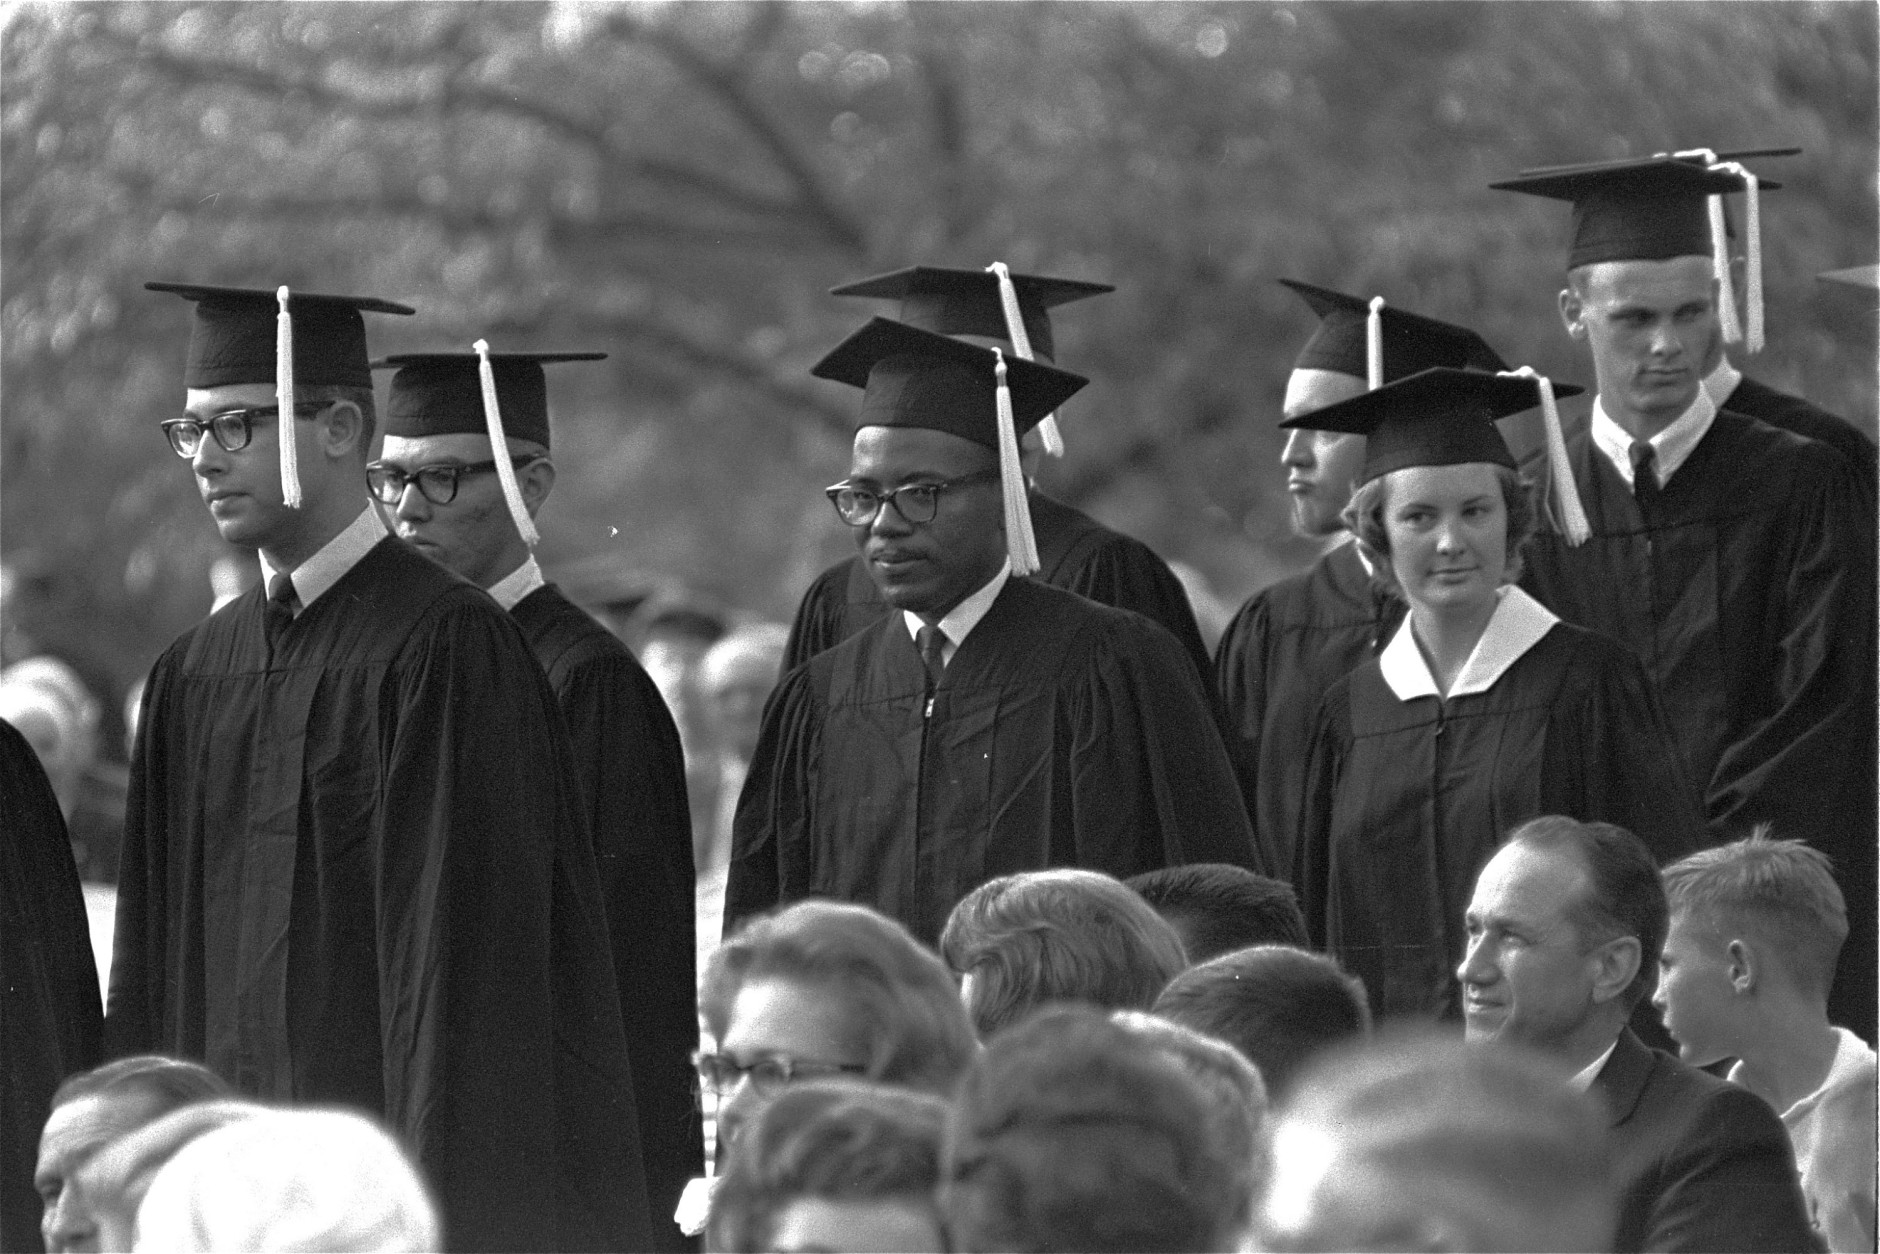 With a tight grin fixed on his face, James H. Meredith stands in line with fellow students awaiting presentation of diplomas at graduation ceremonies, August 19, 1963, at the University of Mississippi at Oxford.  Meredith became the first black man to get a degree from Ole Mississippi.  (AP Photof)